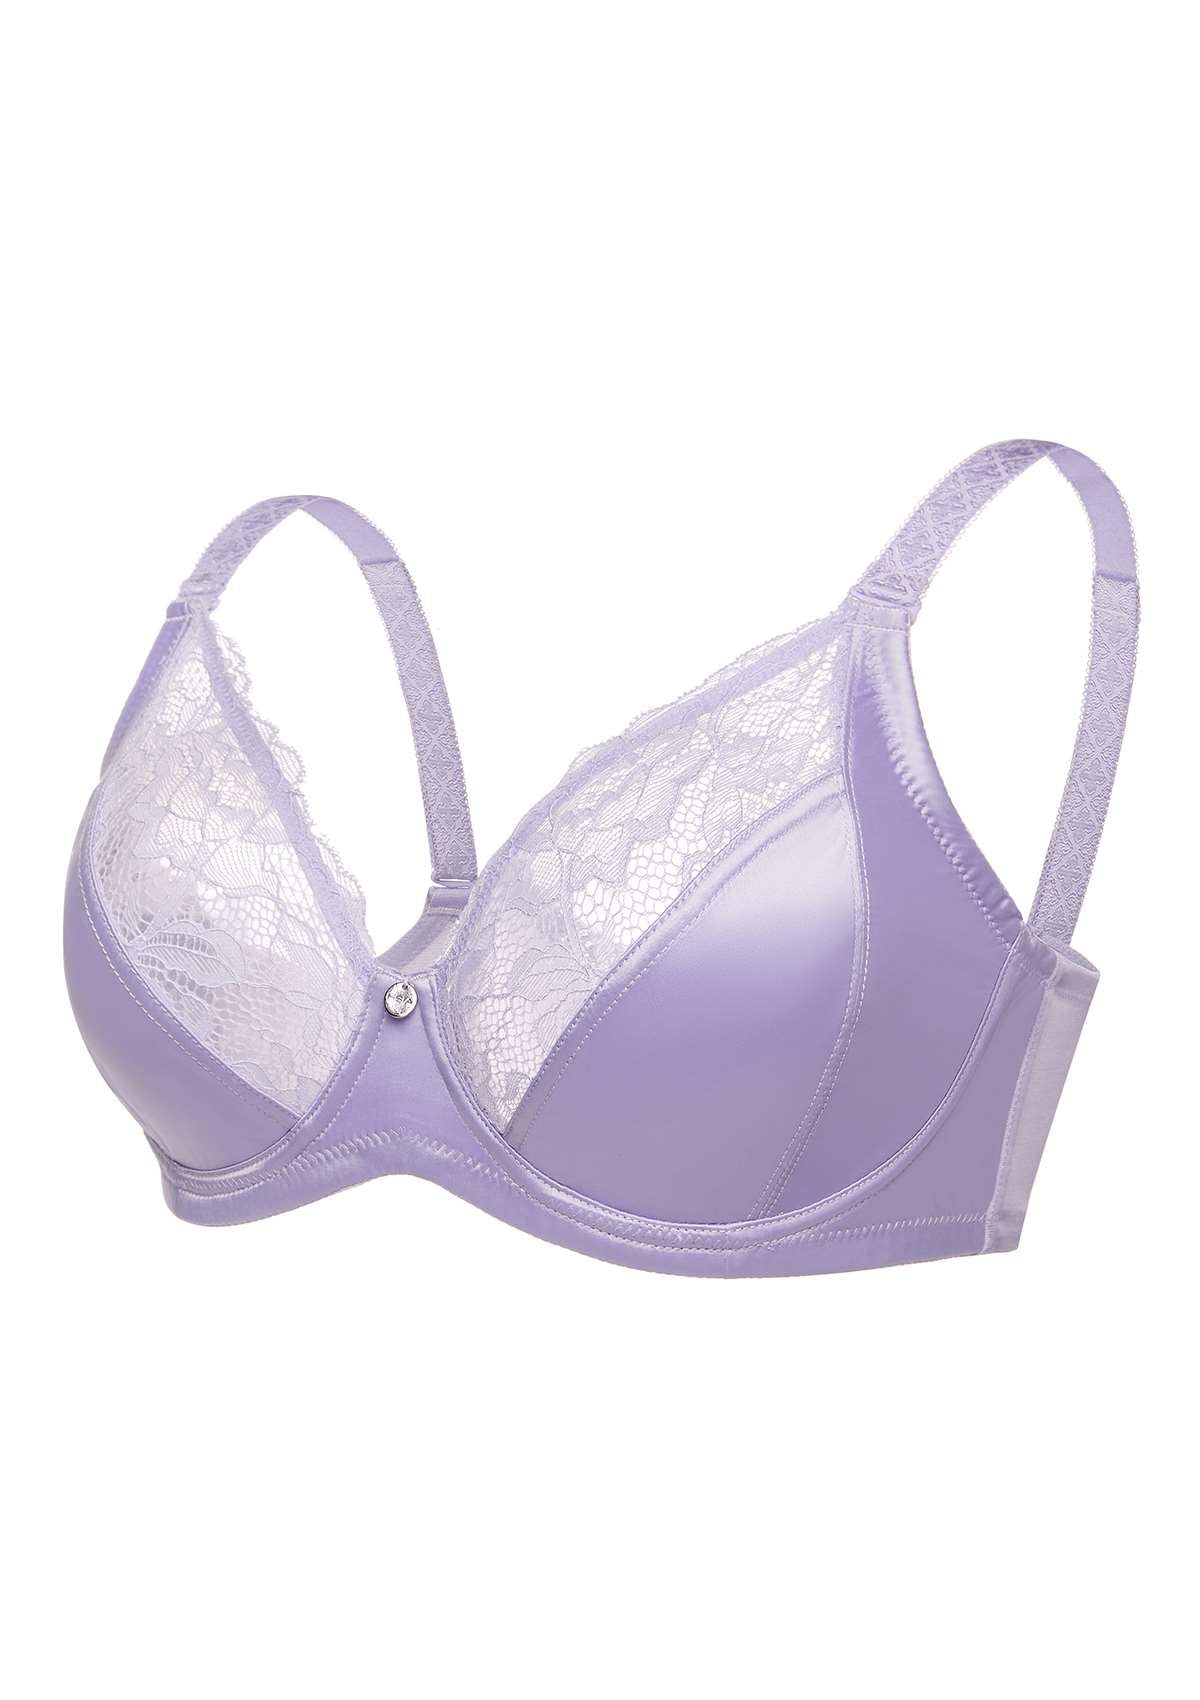 HSIA Foxy Satin Smooth Floral Lace Full Coverage Underwire Bra Set - Purple / 42 / D